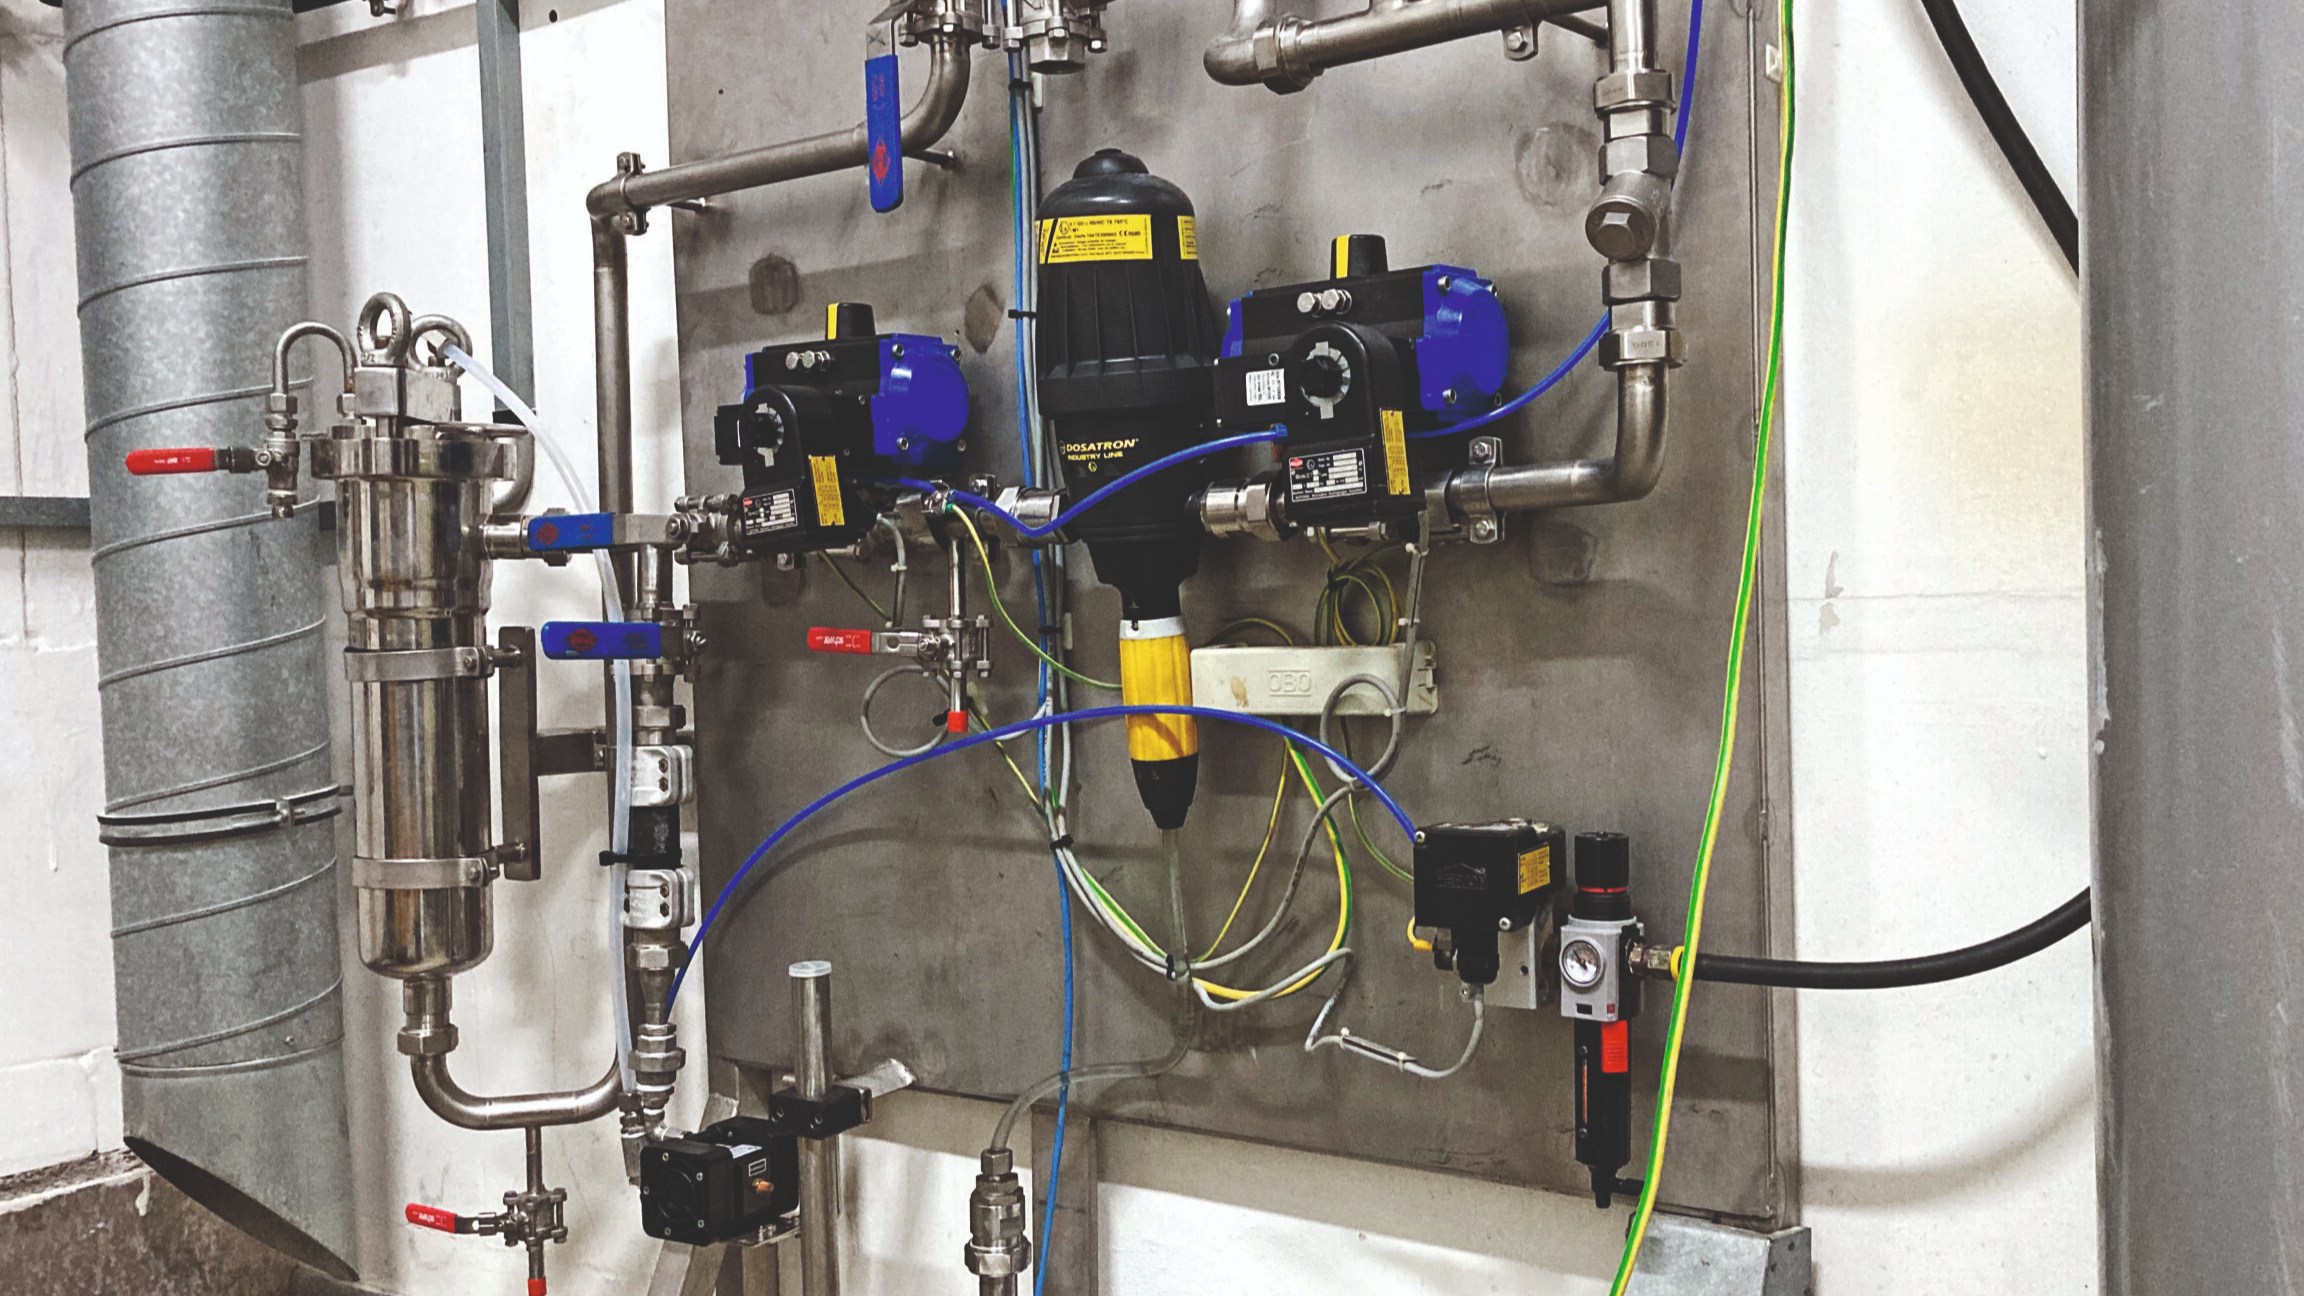 Dosatron | image showing installation of an ATEX certified dosing pump